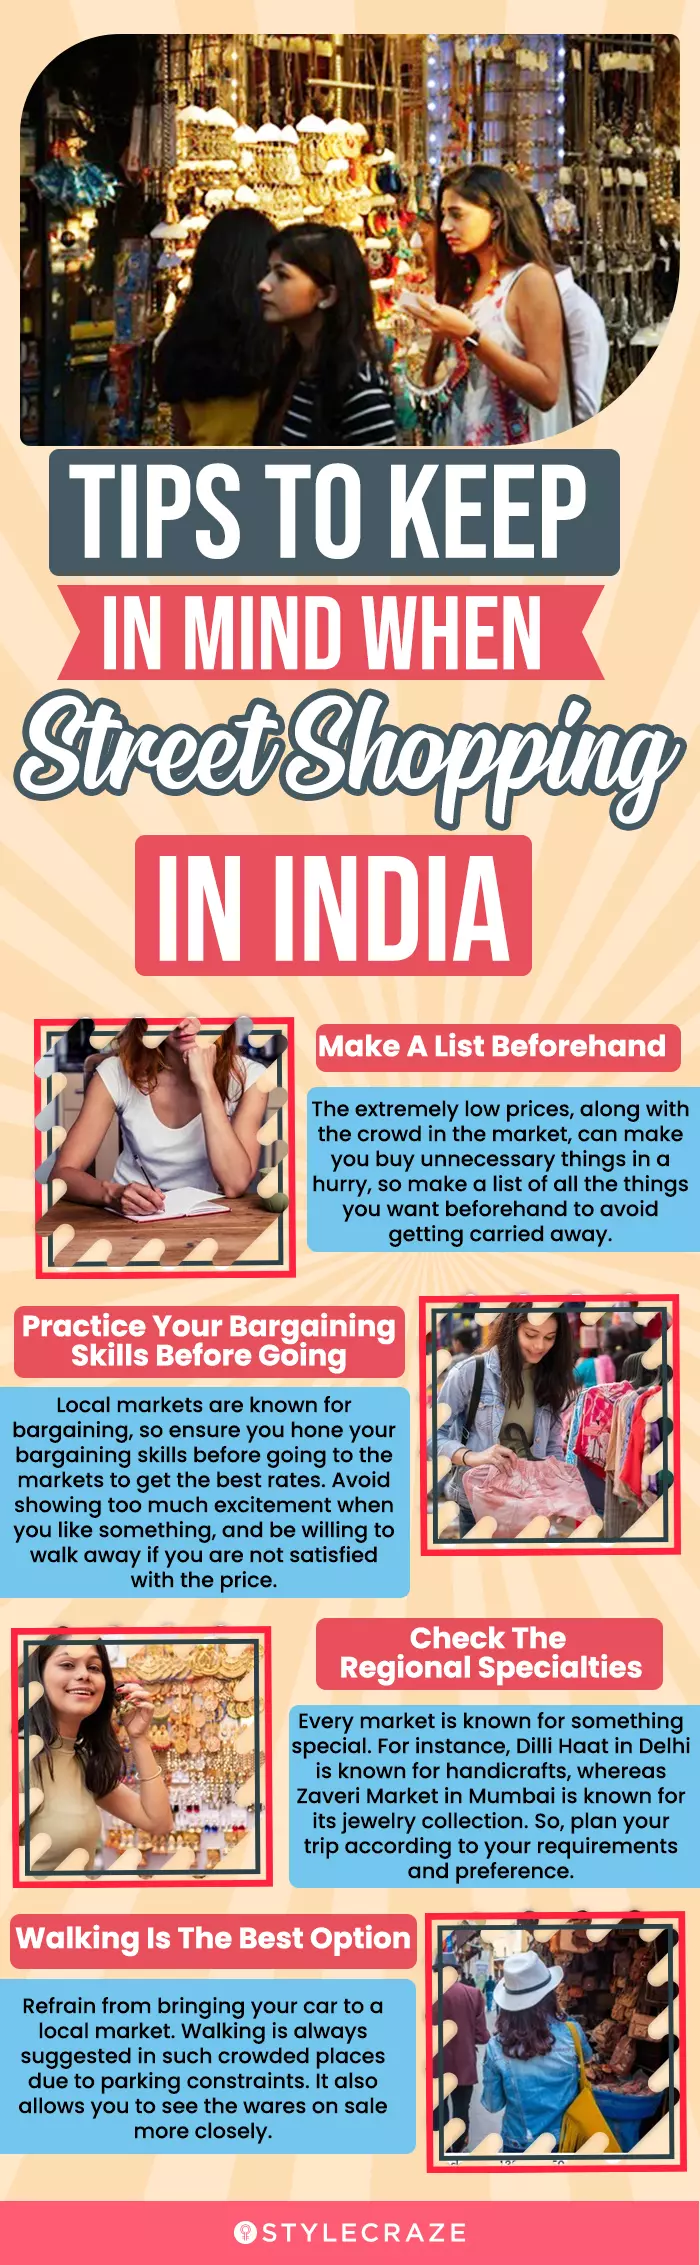 tips to keep in mind when street shopping in india (infographic)